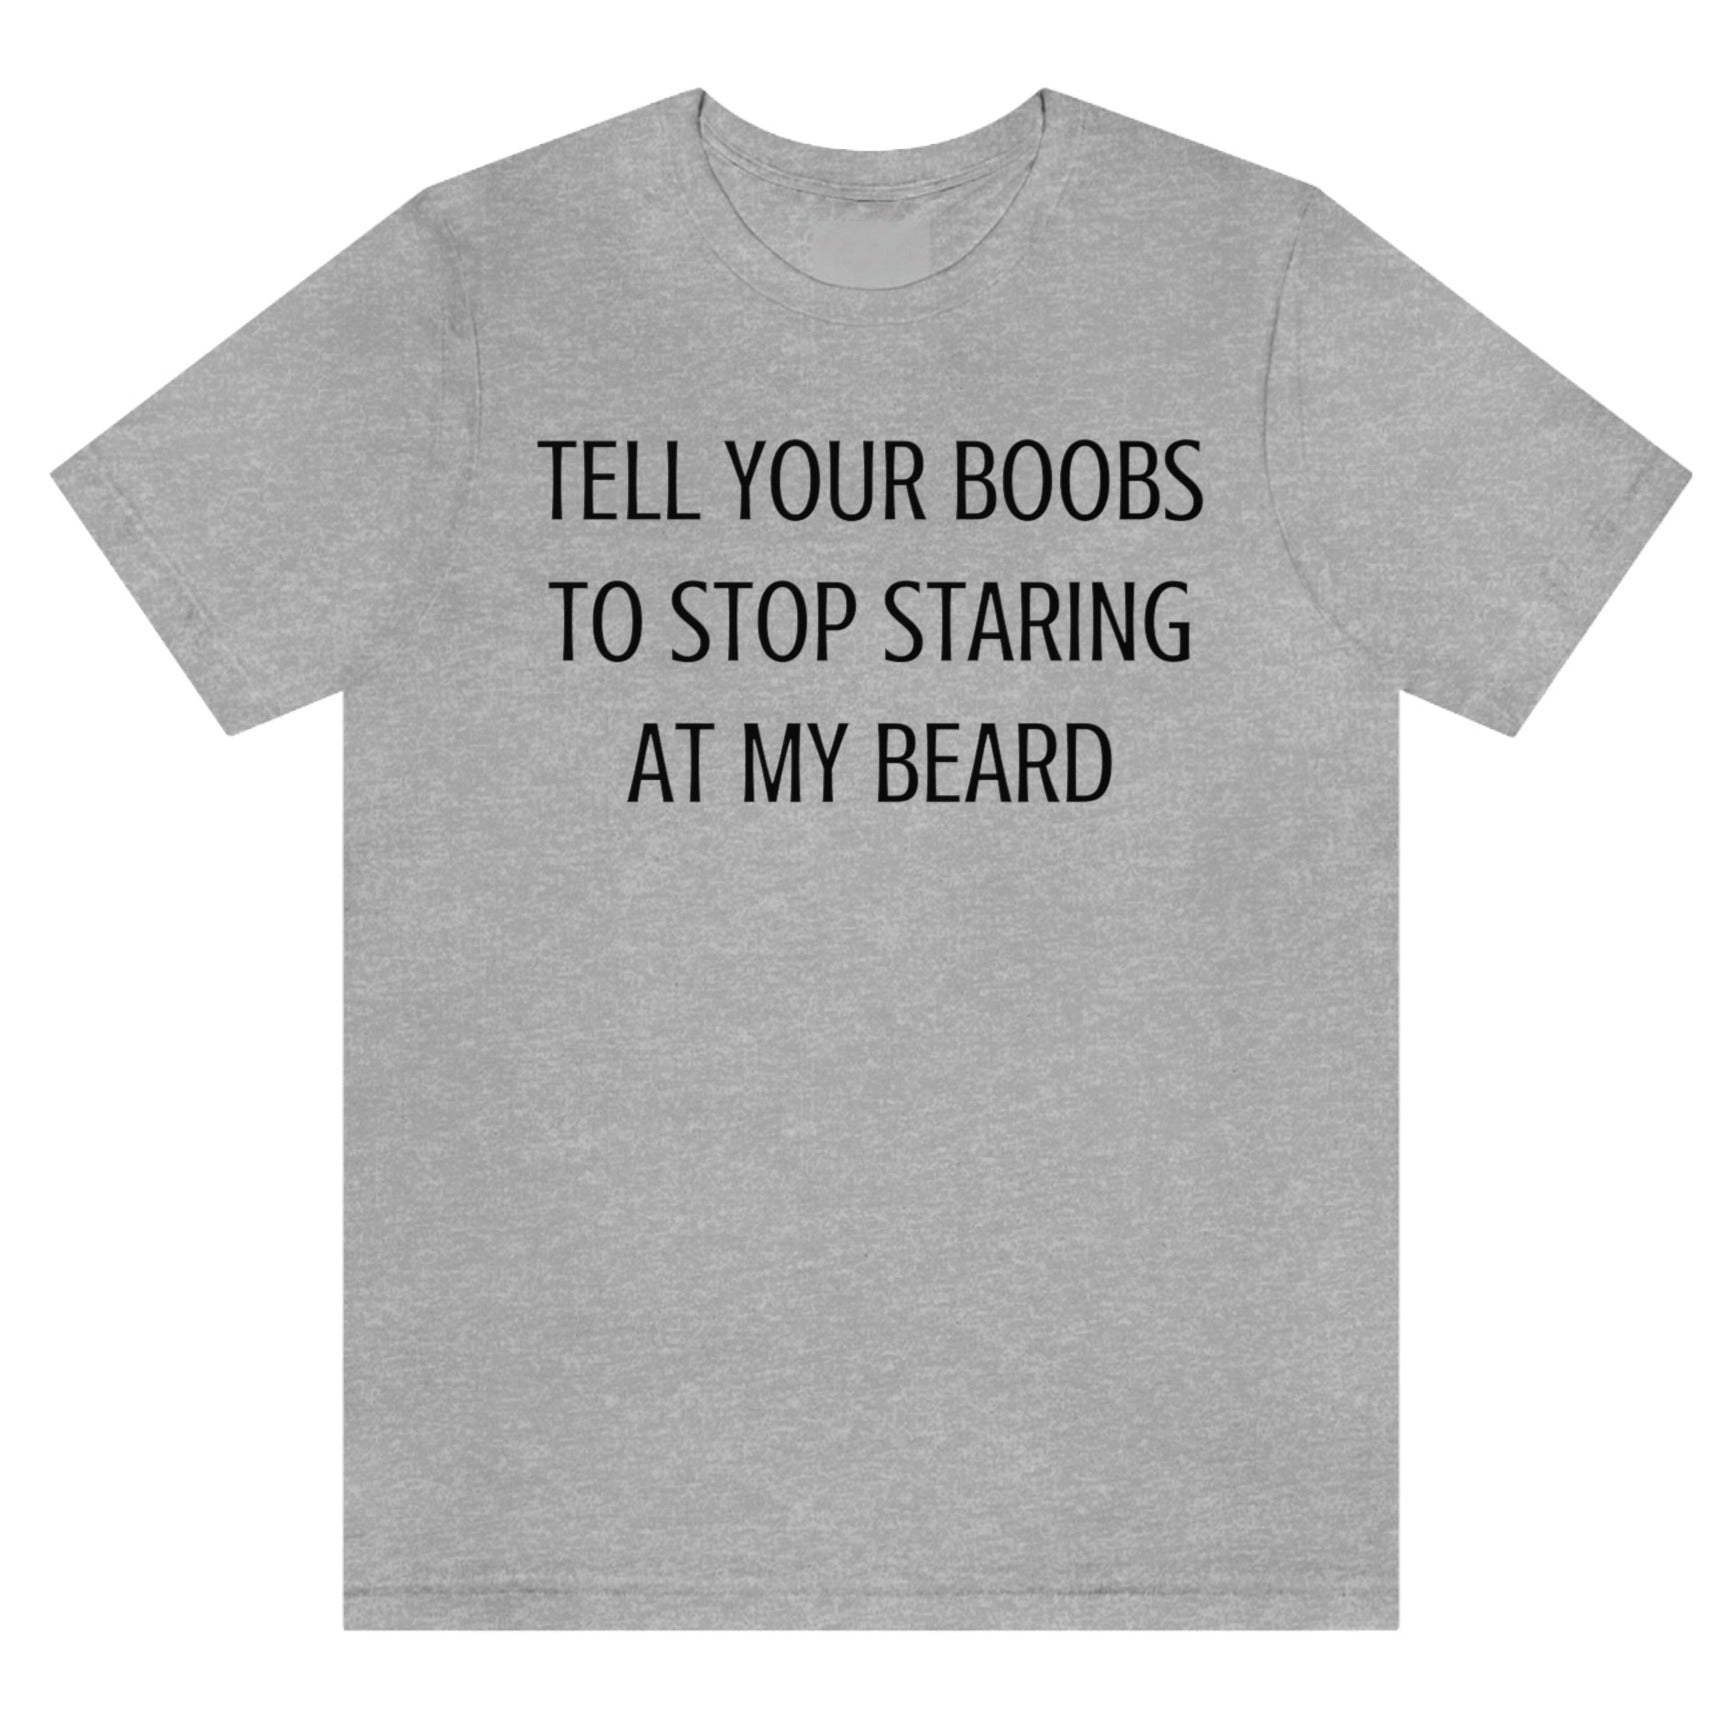 tell-your-boobs-to-stop-staring-at-my-beard-atheletic-heather-grey-t-shirt-mens-funny